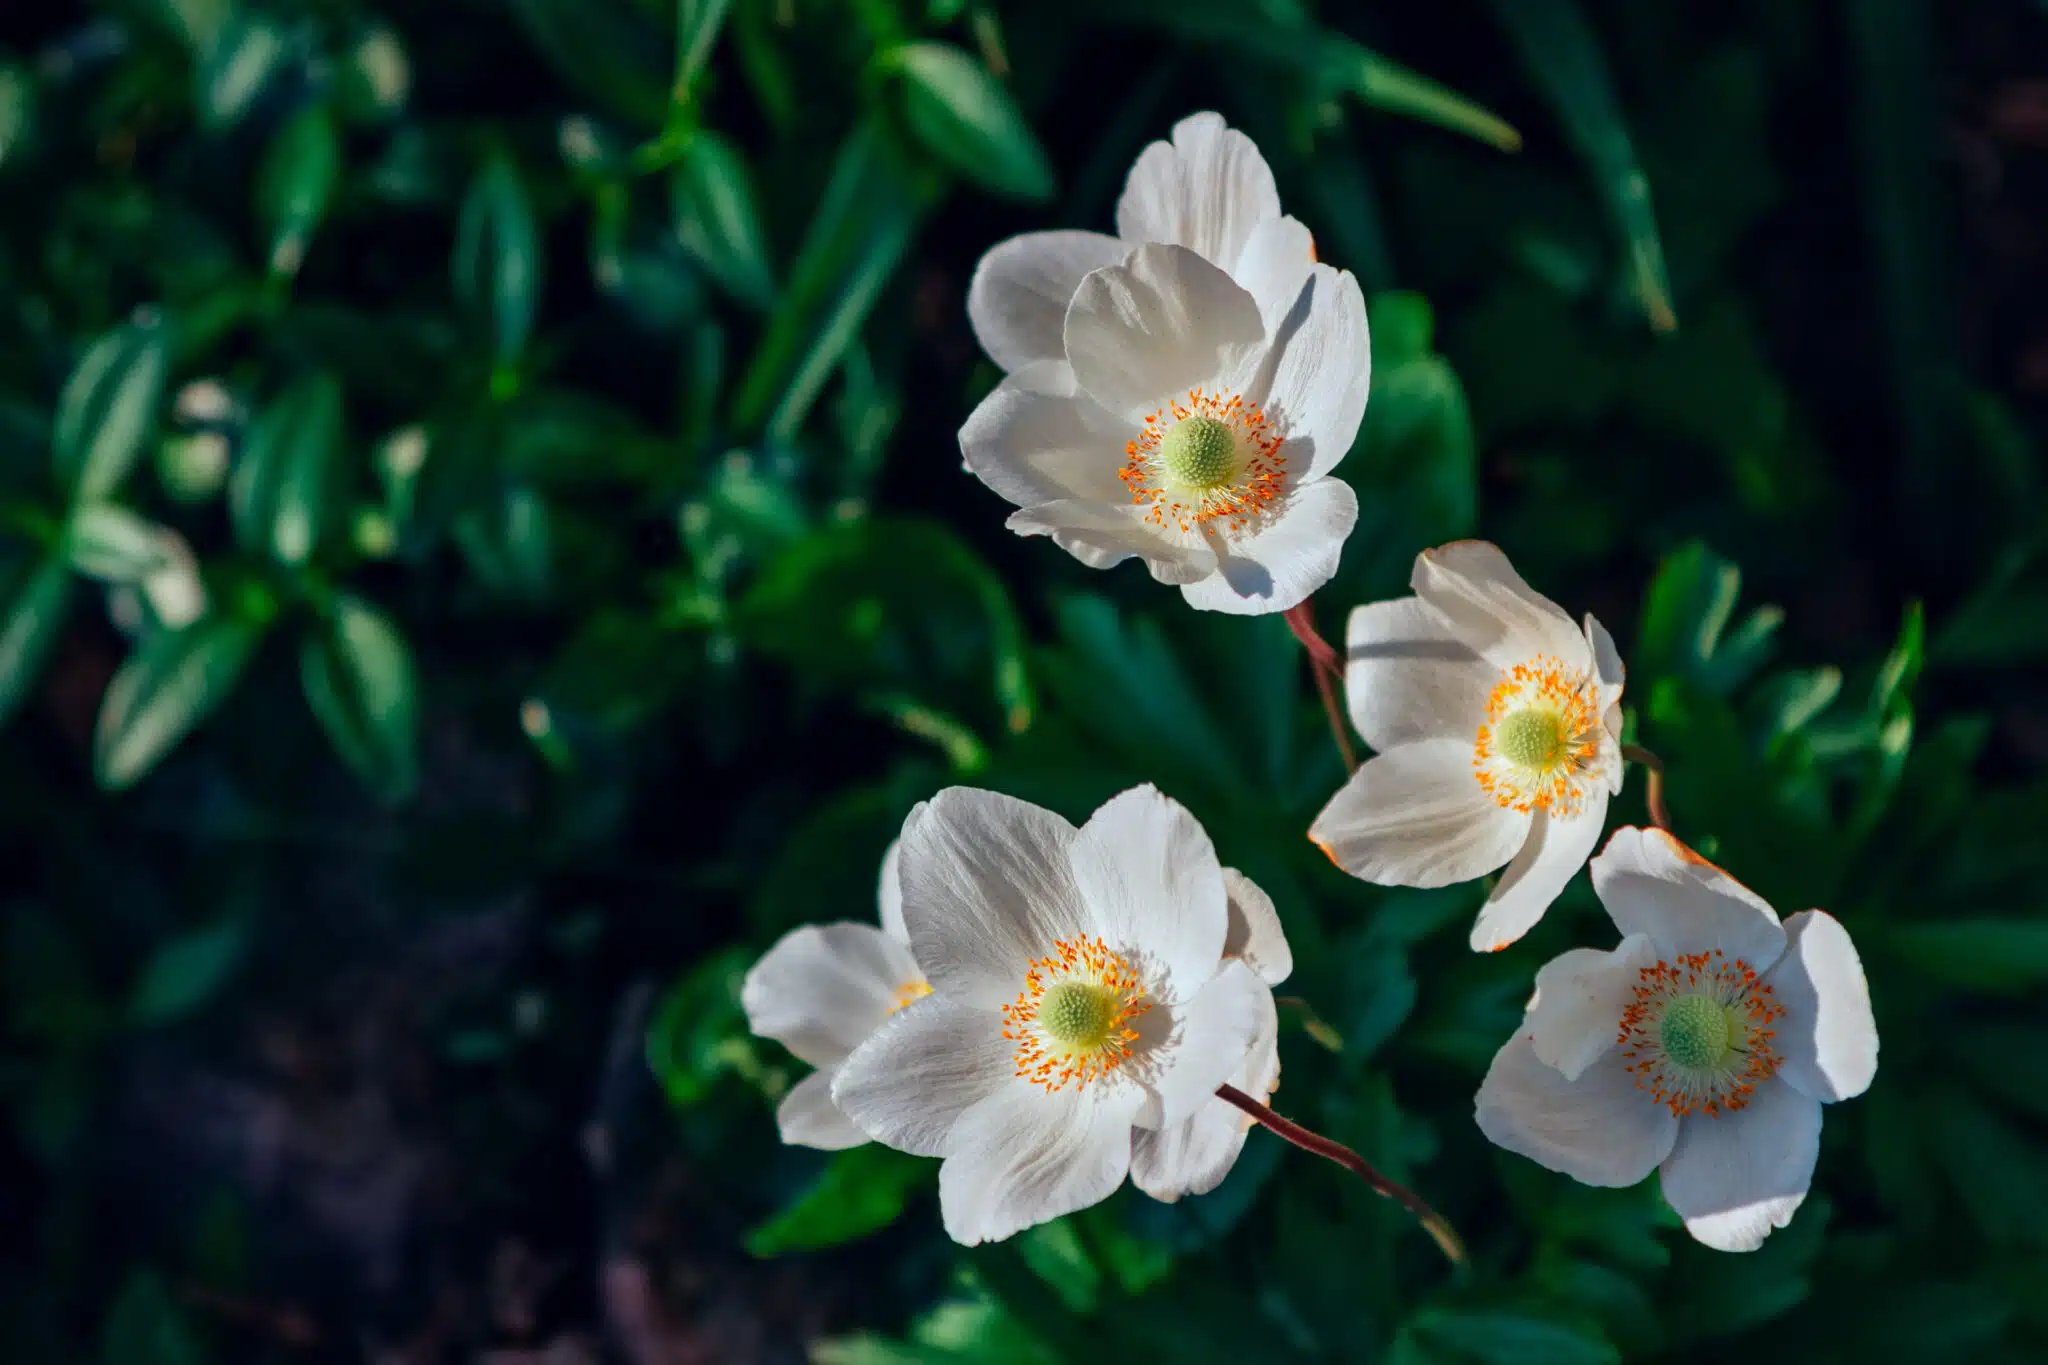 Beautiful blooming white anemone flowers growing in the garden.